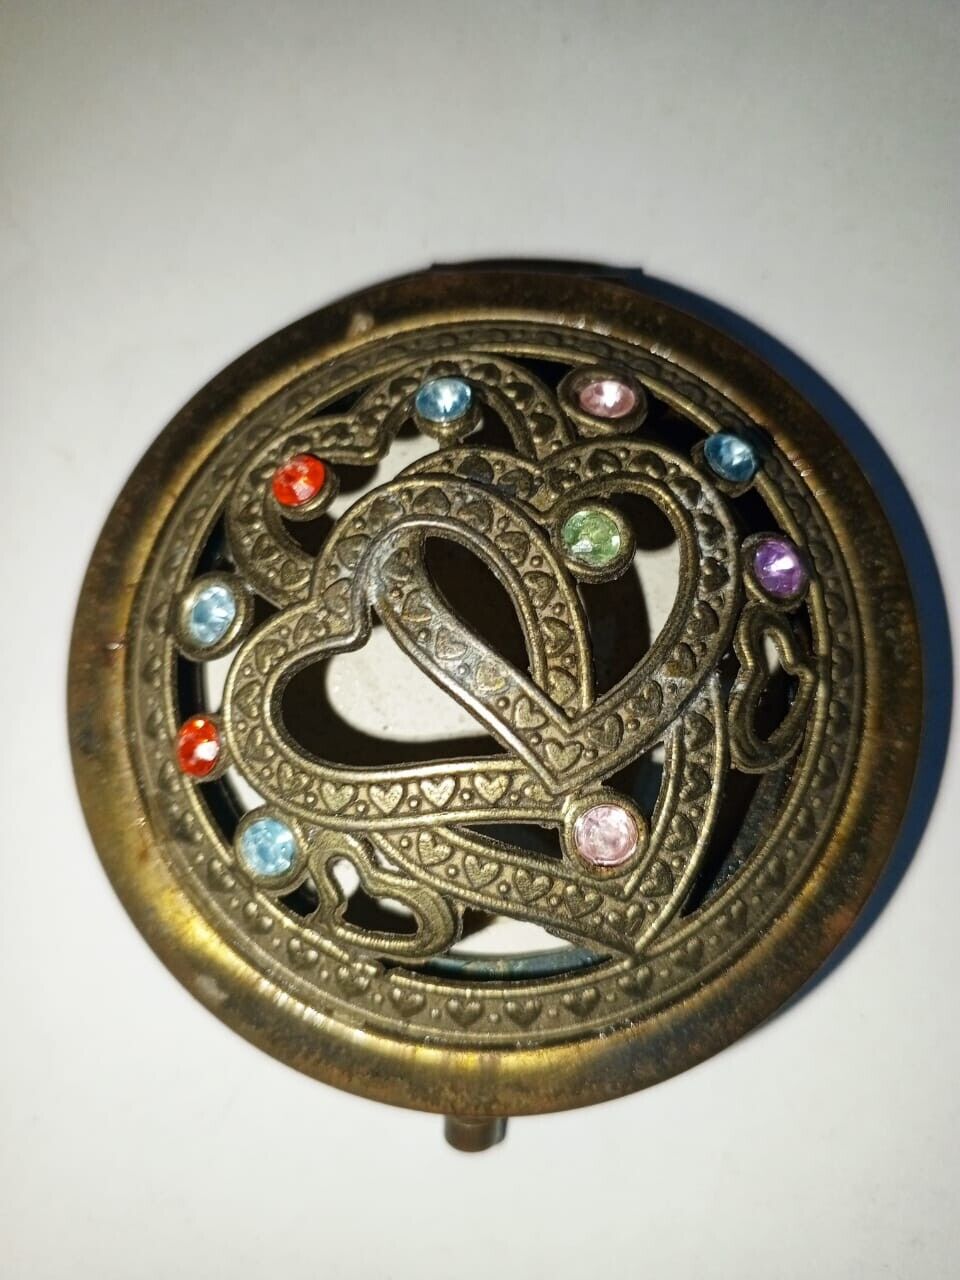 A very old antique brass hand mirror embroidered with natural stones